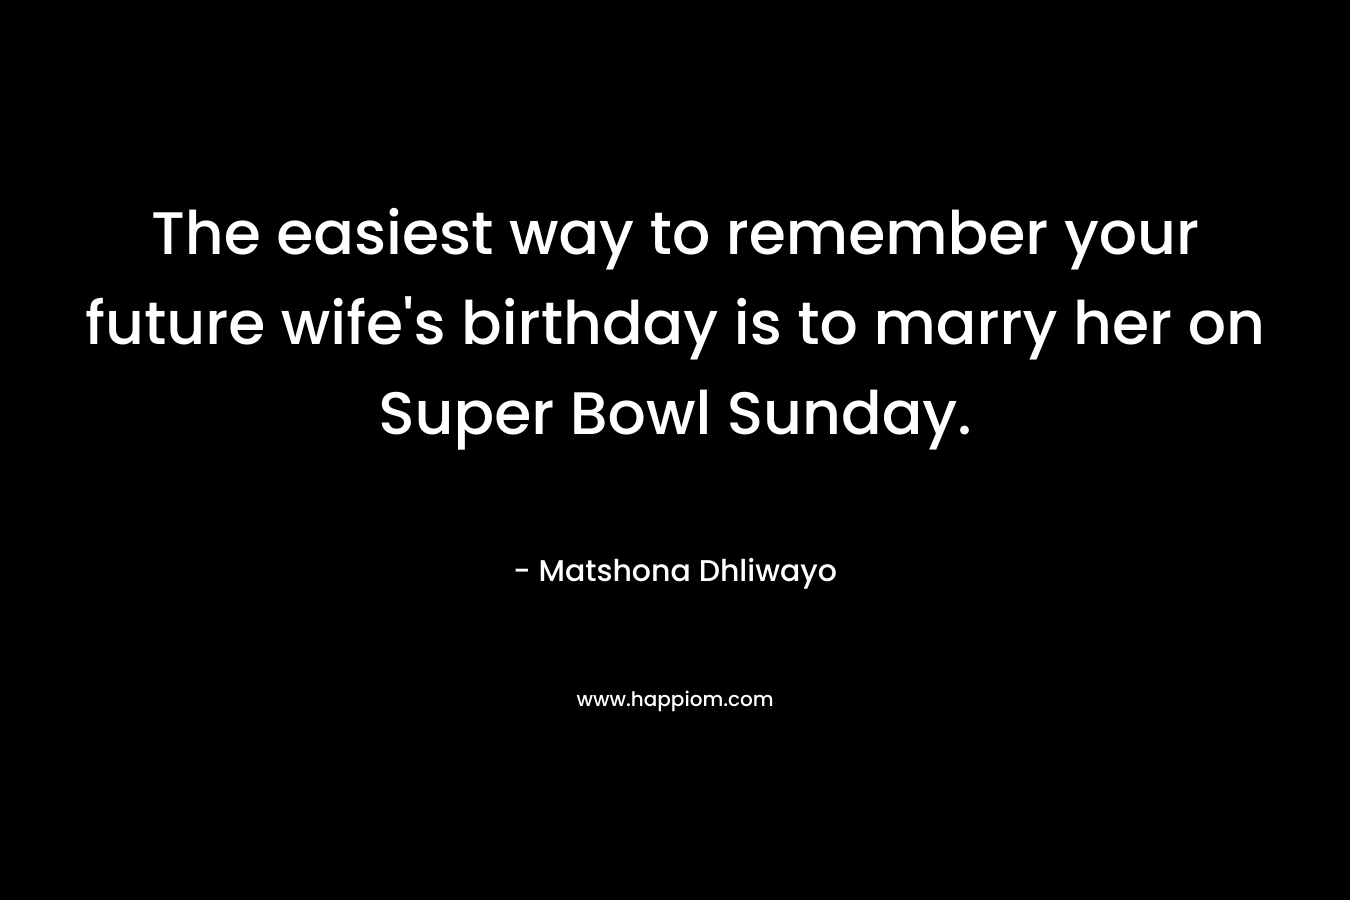 The easiest way to remember your future wife's birthday is to marry her on Super Bowl Sunday.